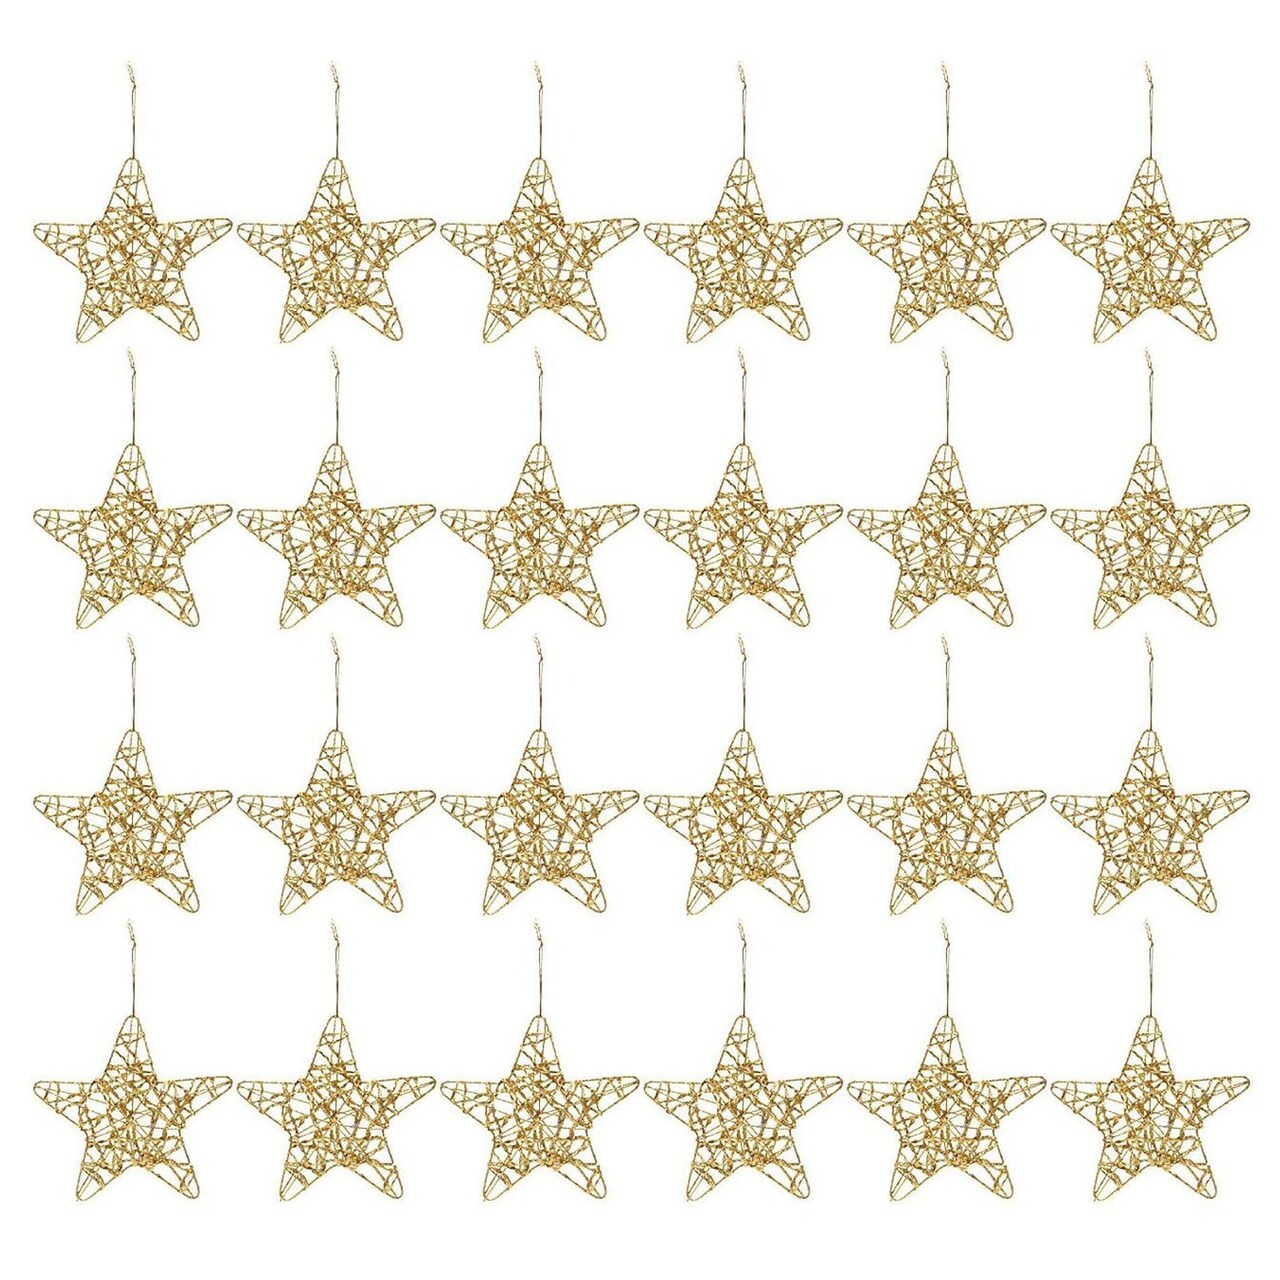 24 Pack Gold Star Ornaments for Christmas Tree, Bulk Holiday Decorations (6 Inches)